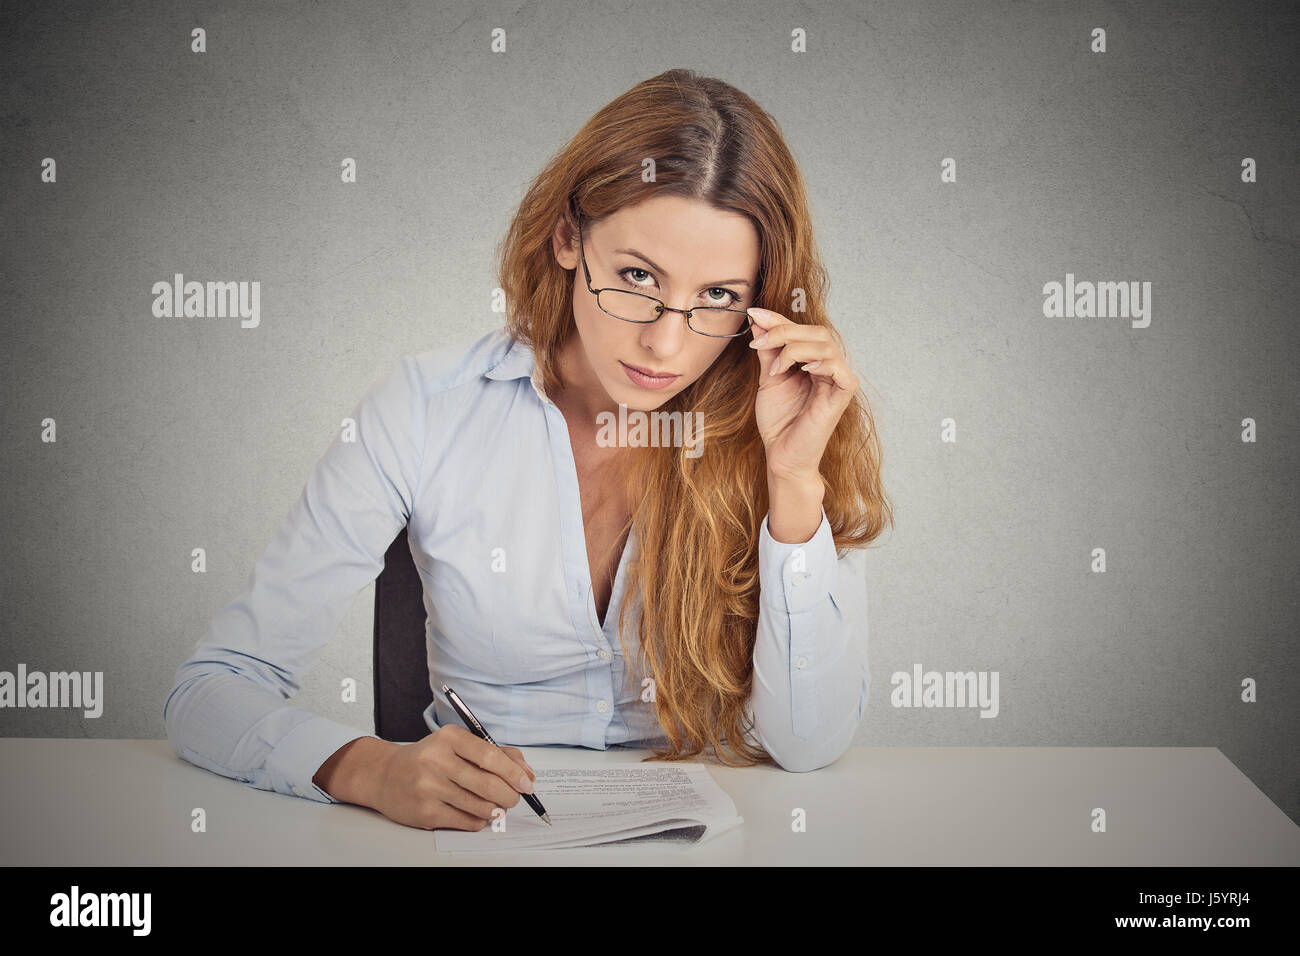 Curious corporate businesswoman with glasses sitting at desk skeptically looking at you scrutinizing isolated on office grey wall background. Human fa Stock Photo